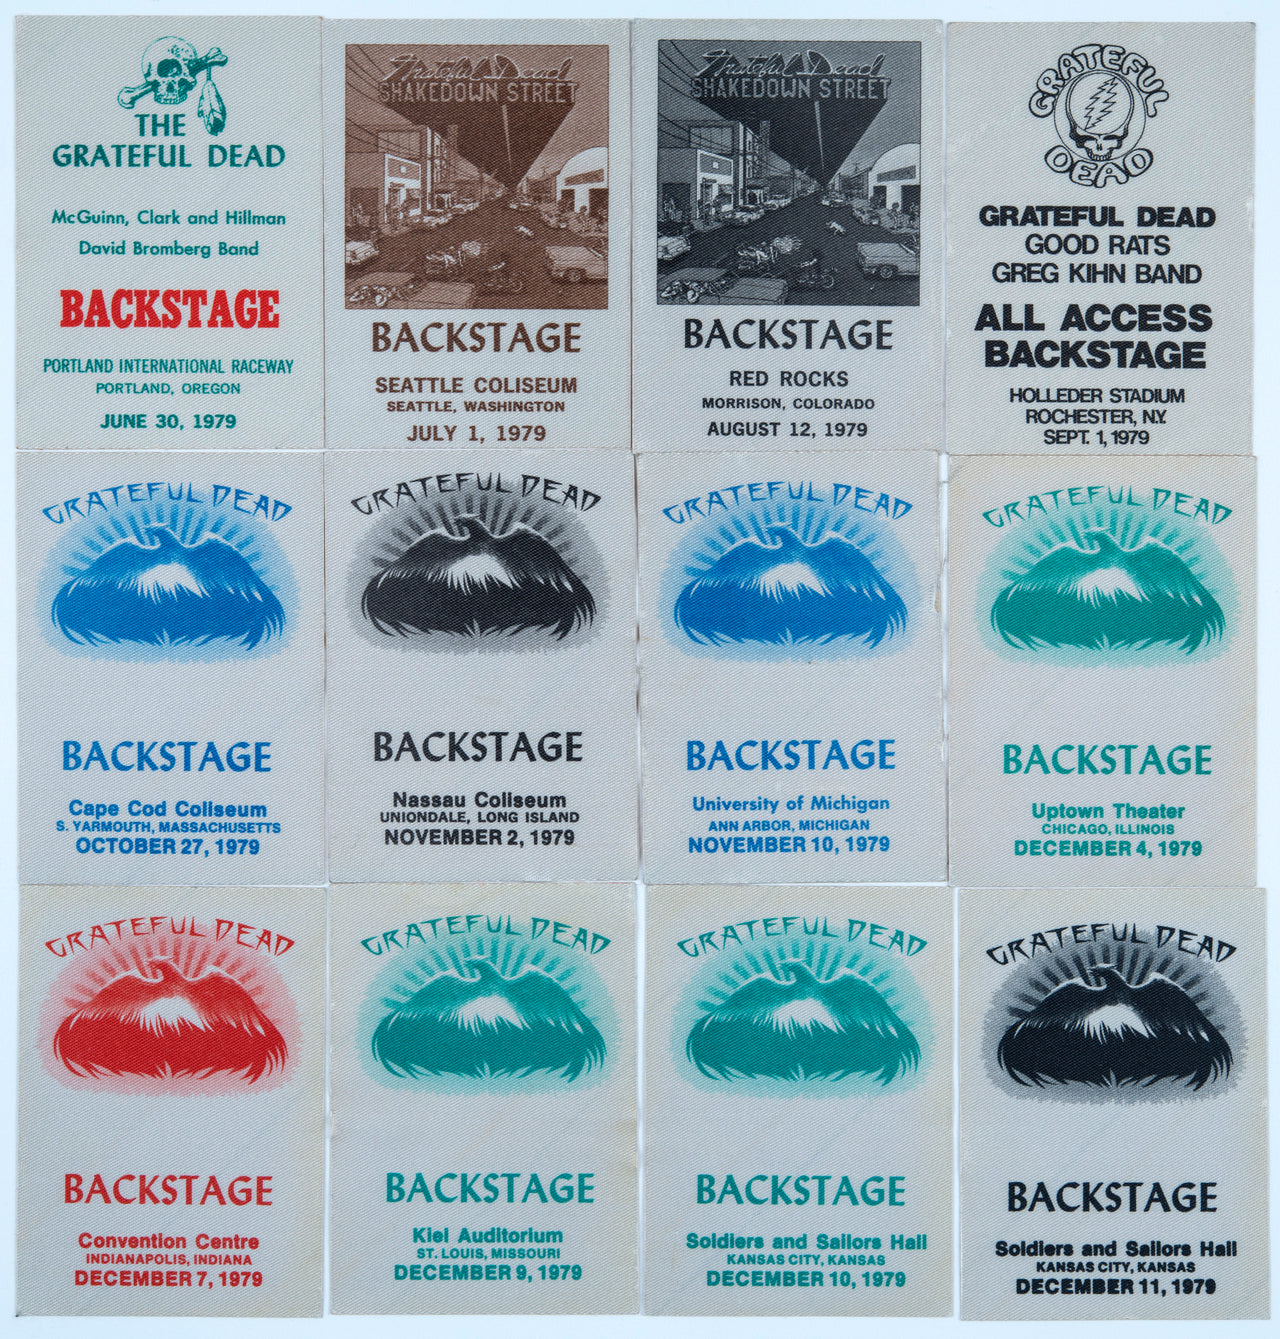 Grateful Dead Backstage Passes (6/30/1979 - 12/11/1979) from Dan Healy